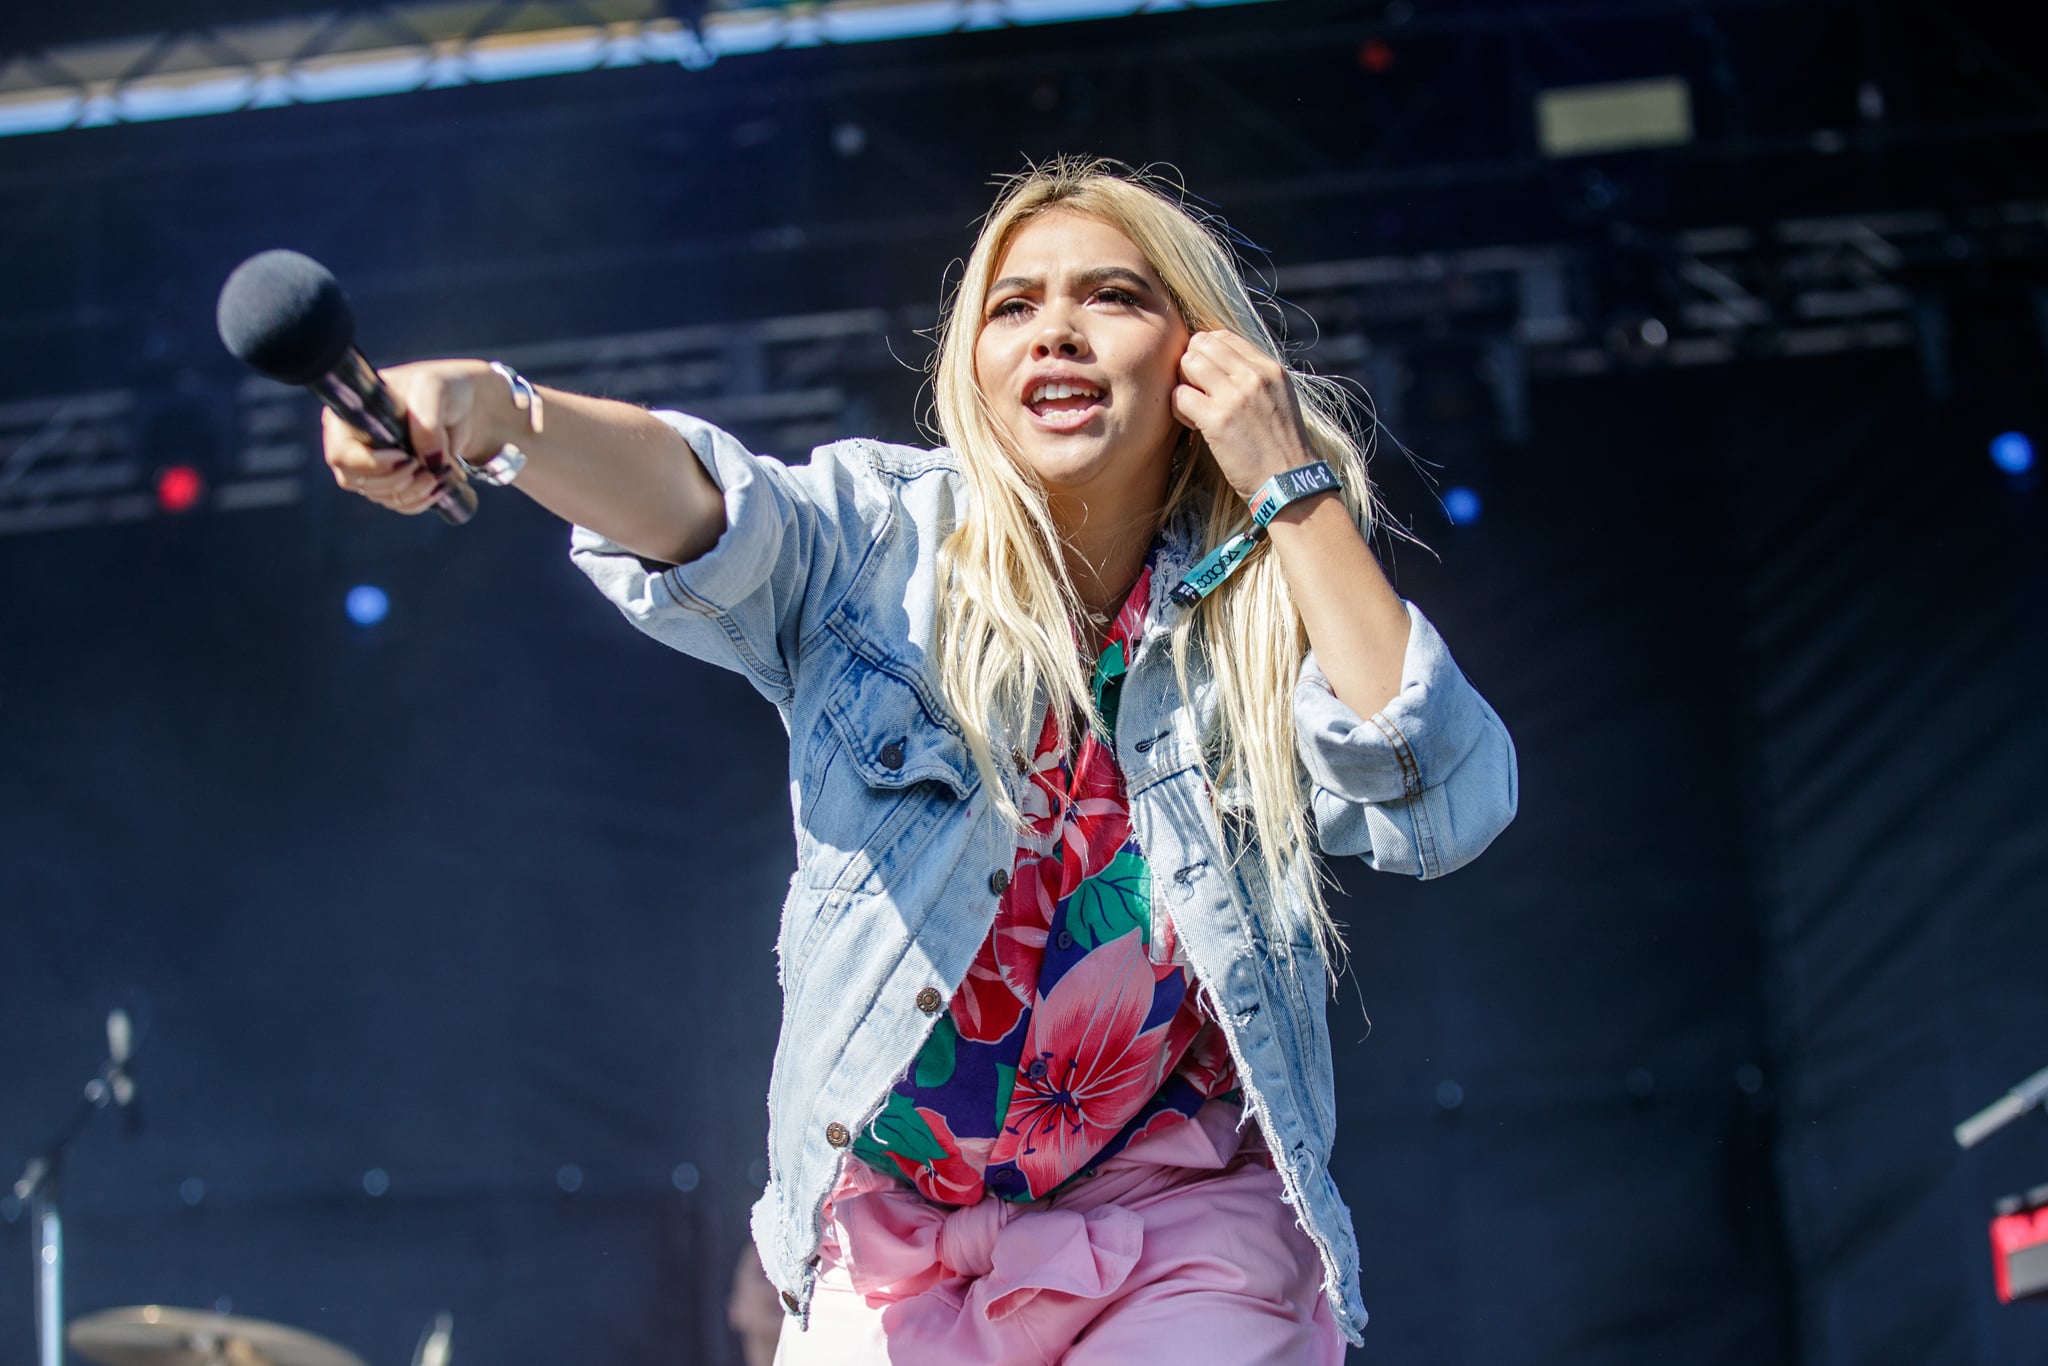 NEW ORLEANS, LA - OCTOBER 28:  Hayley Kiyoko performs during the Voodoo Music + Arts Experience at City Park on October 28, 2017 in New Orleans, Louisiana.  (Photo by Josh Brasted/WireImage)